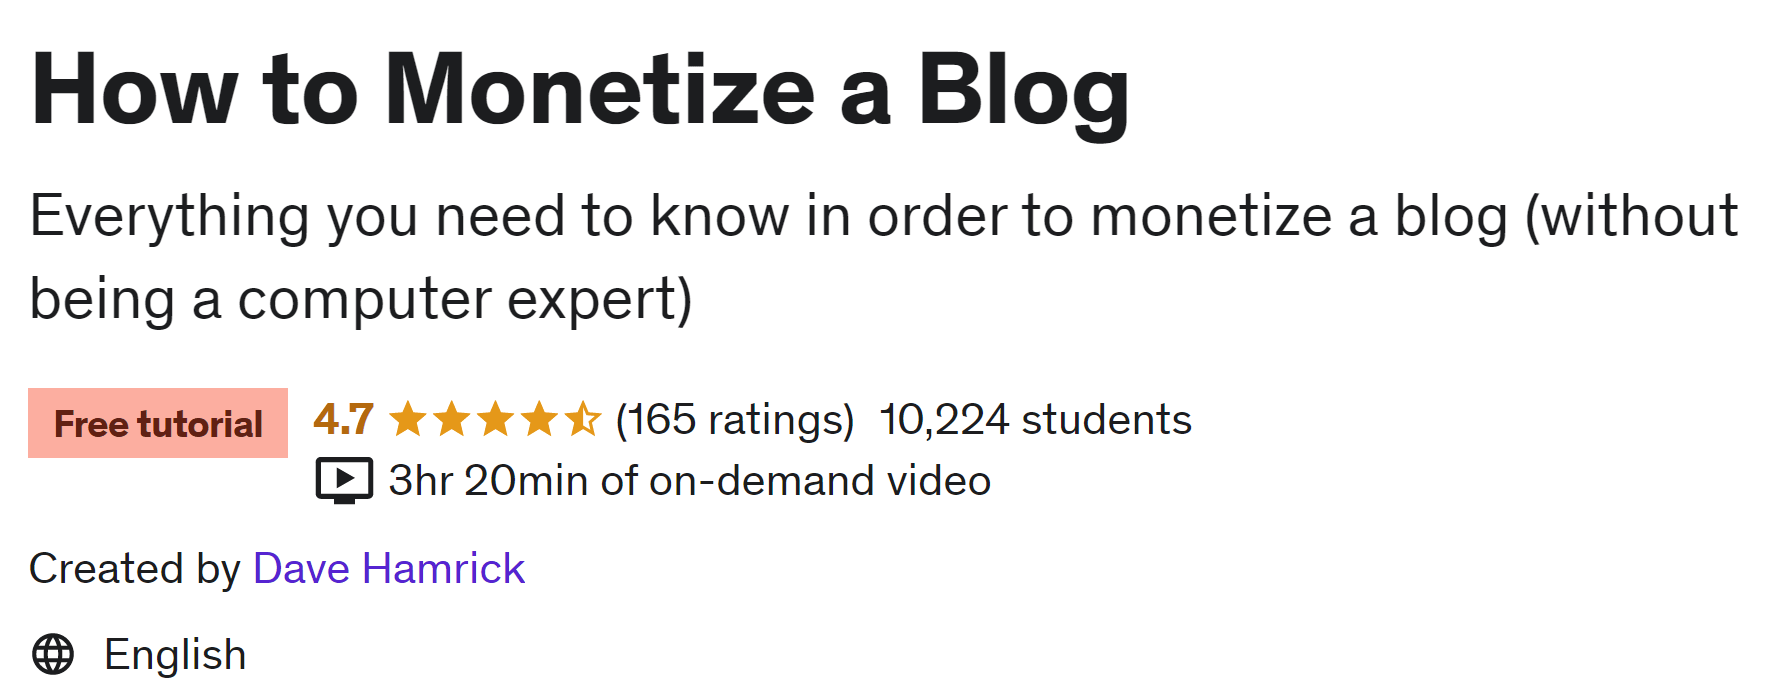 Free blogging courses for beginners: Udemy's How to Monetize a Blog course